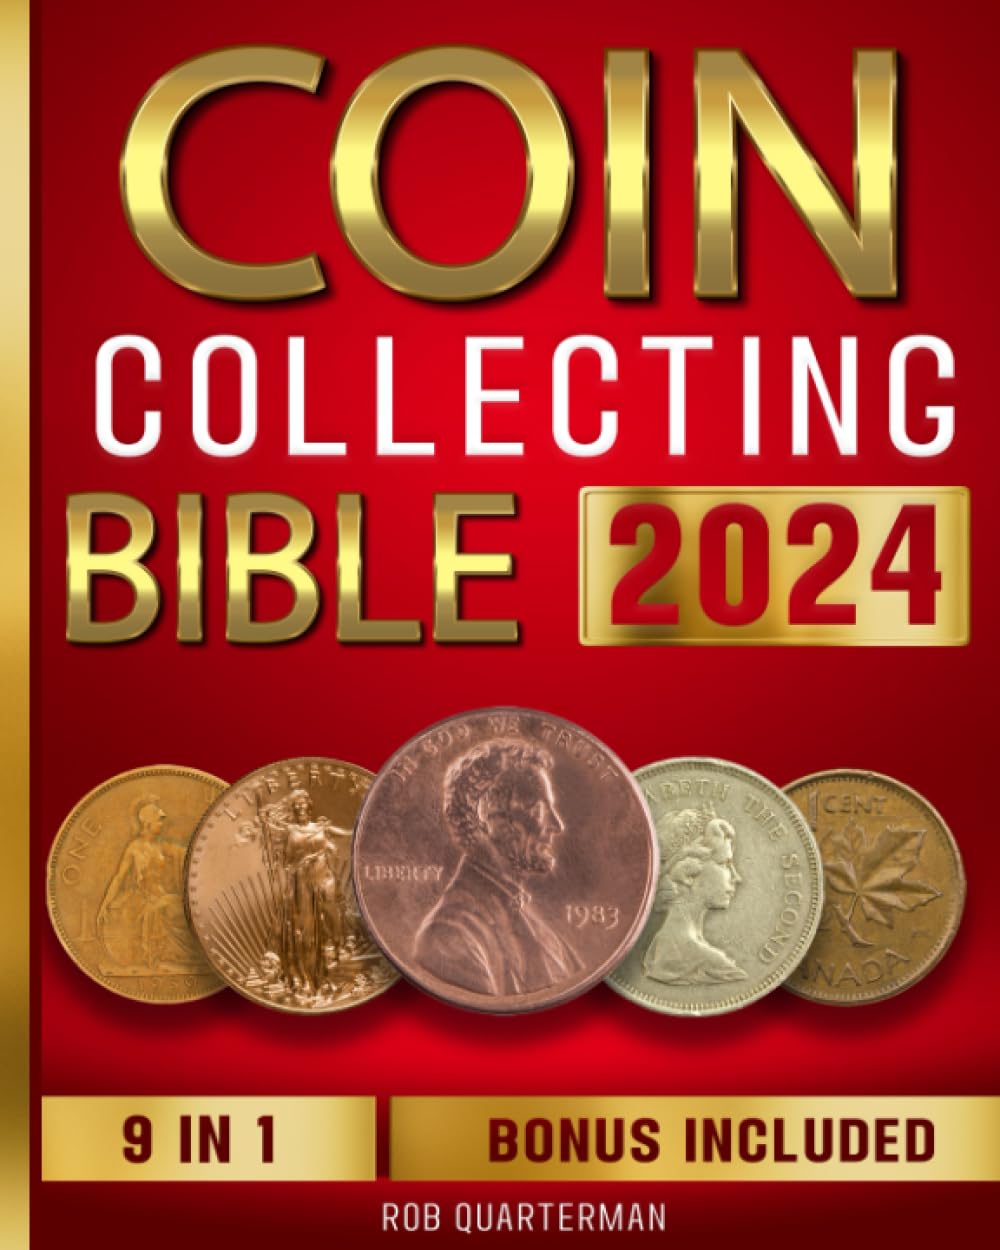 Coin Collecting Bible: The #1 Beginner to Advanced Coin Book | Learn the Replicable Strategies to Start Your Coin Collection, Uncover Hidden Treasure, and Avoid Worst Counterfeits or Scam